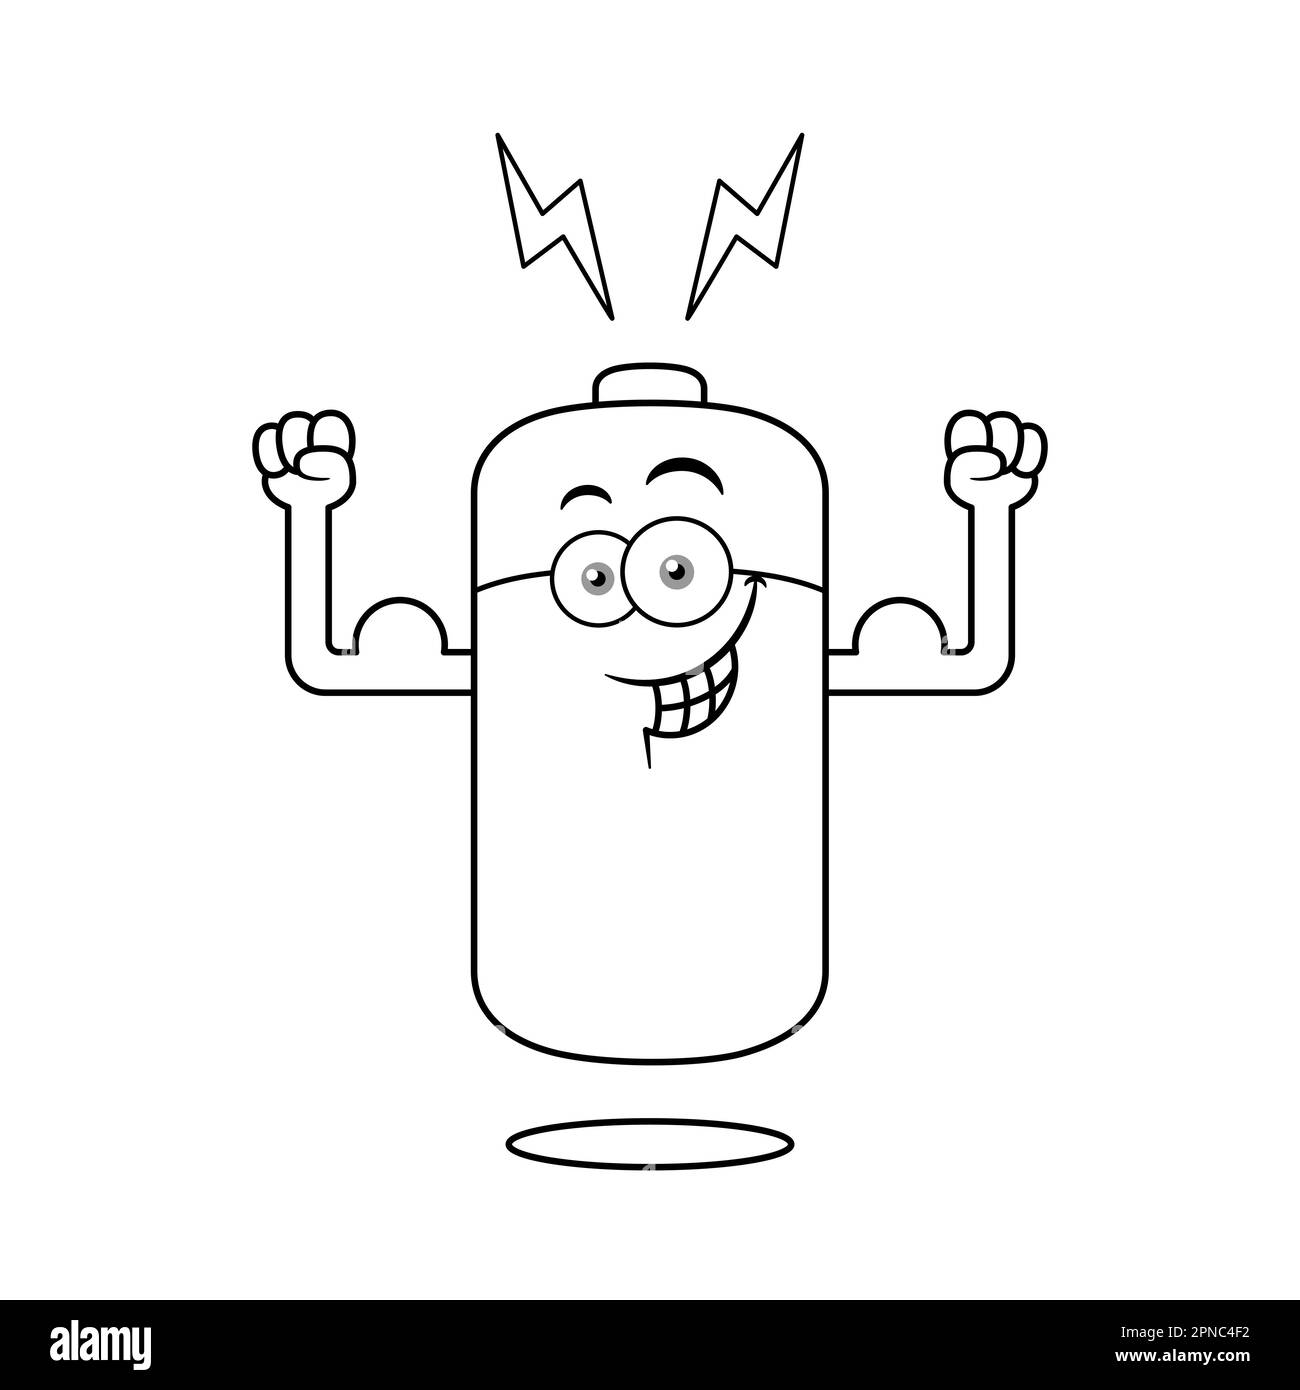 Black And White Power Battery Cartoon Character Stock Vector